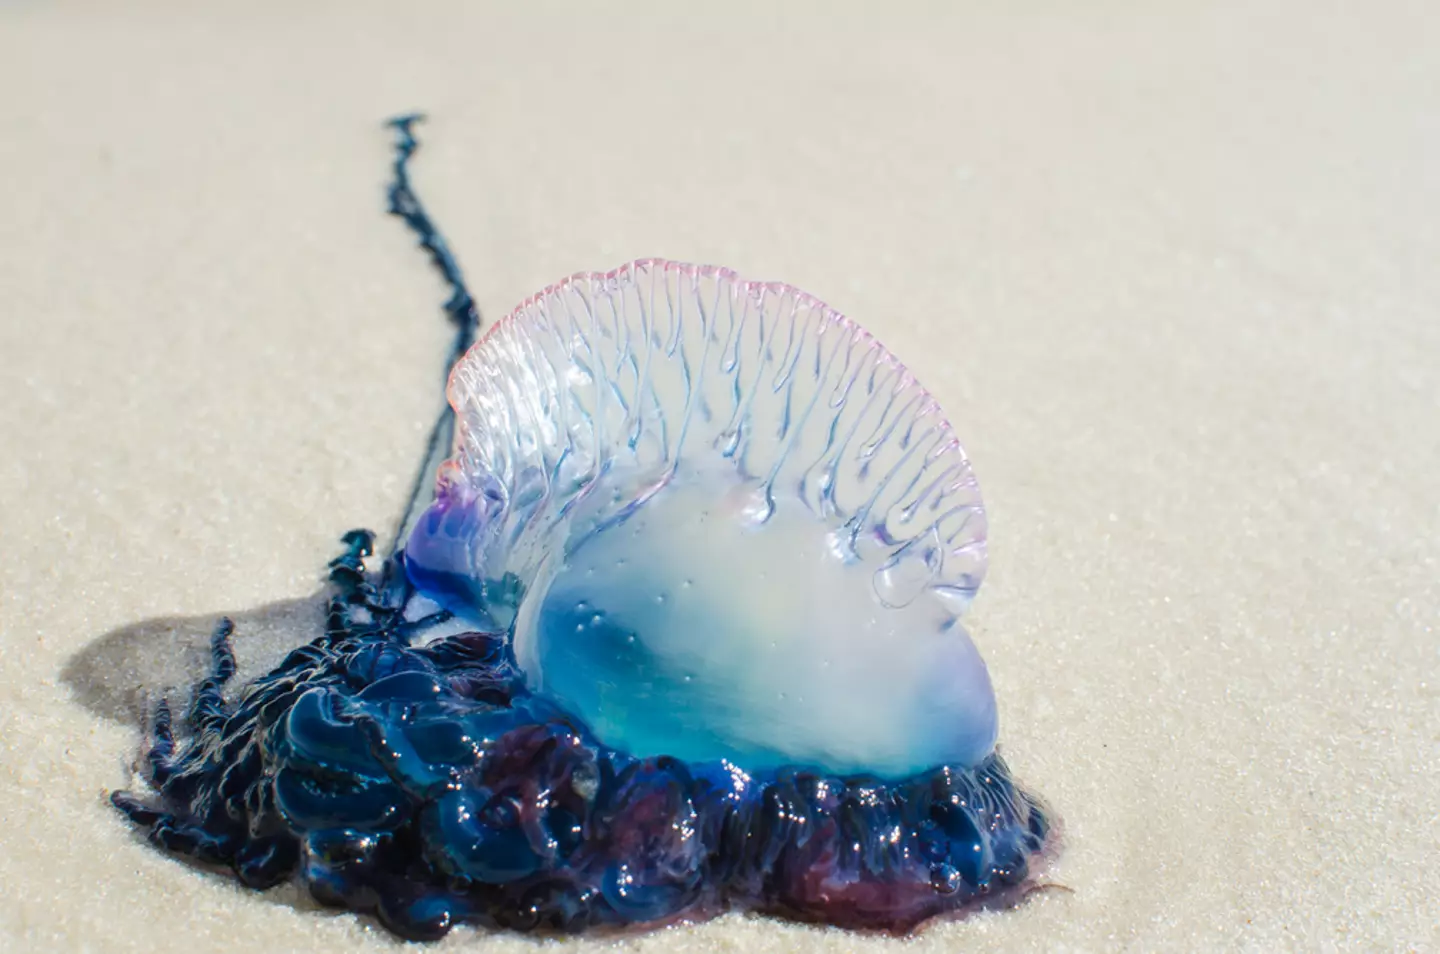 While they can't be fatal, Man O'War's can cause a nasty sting.